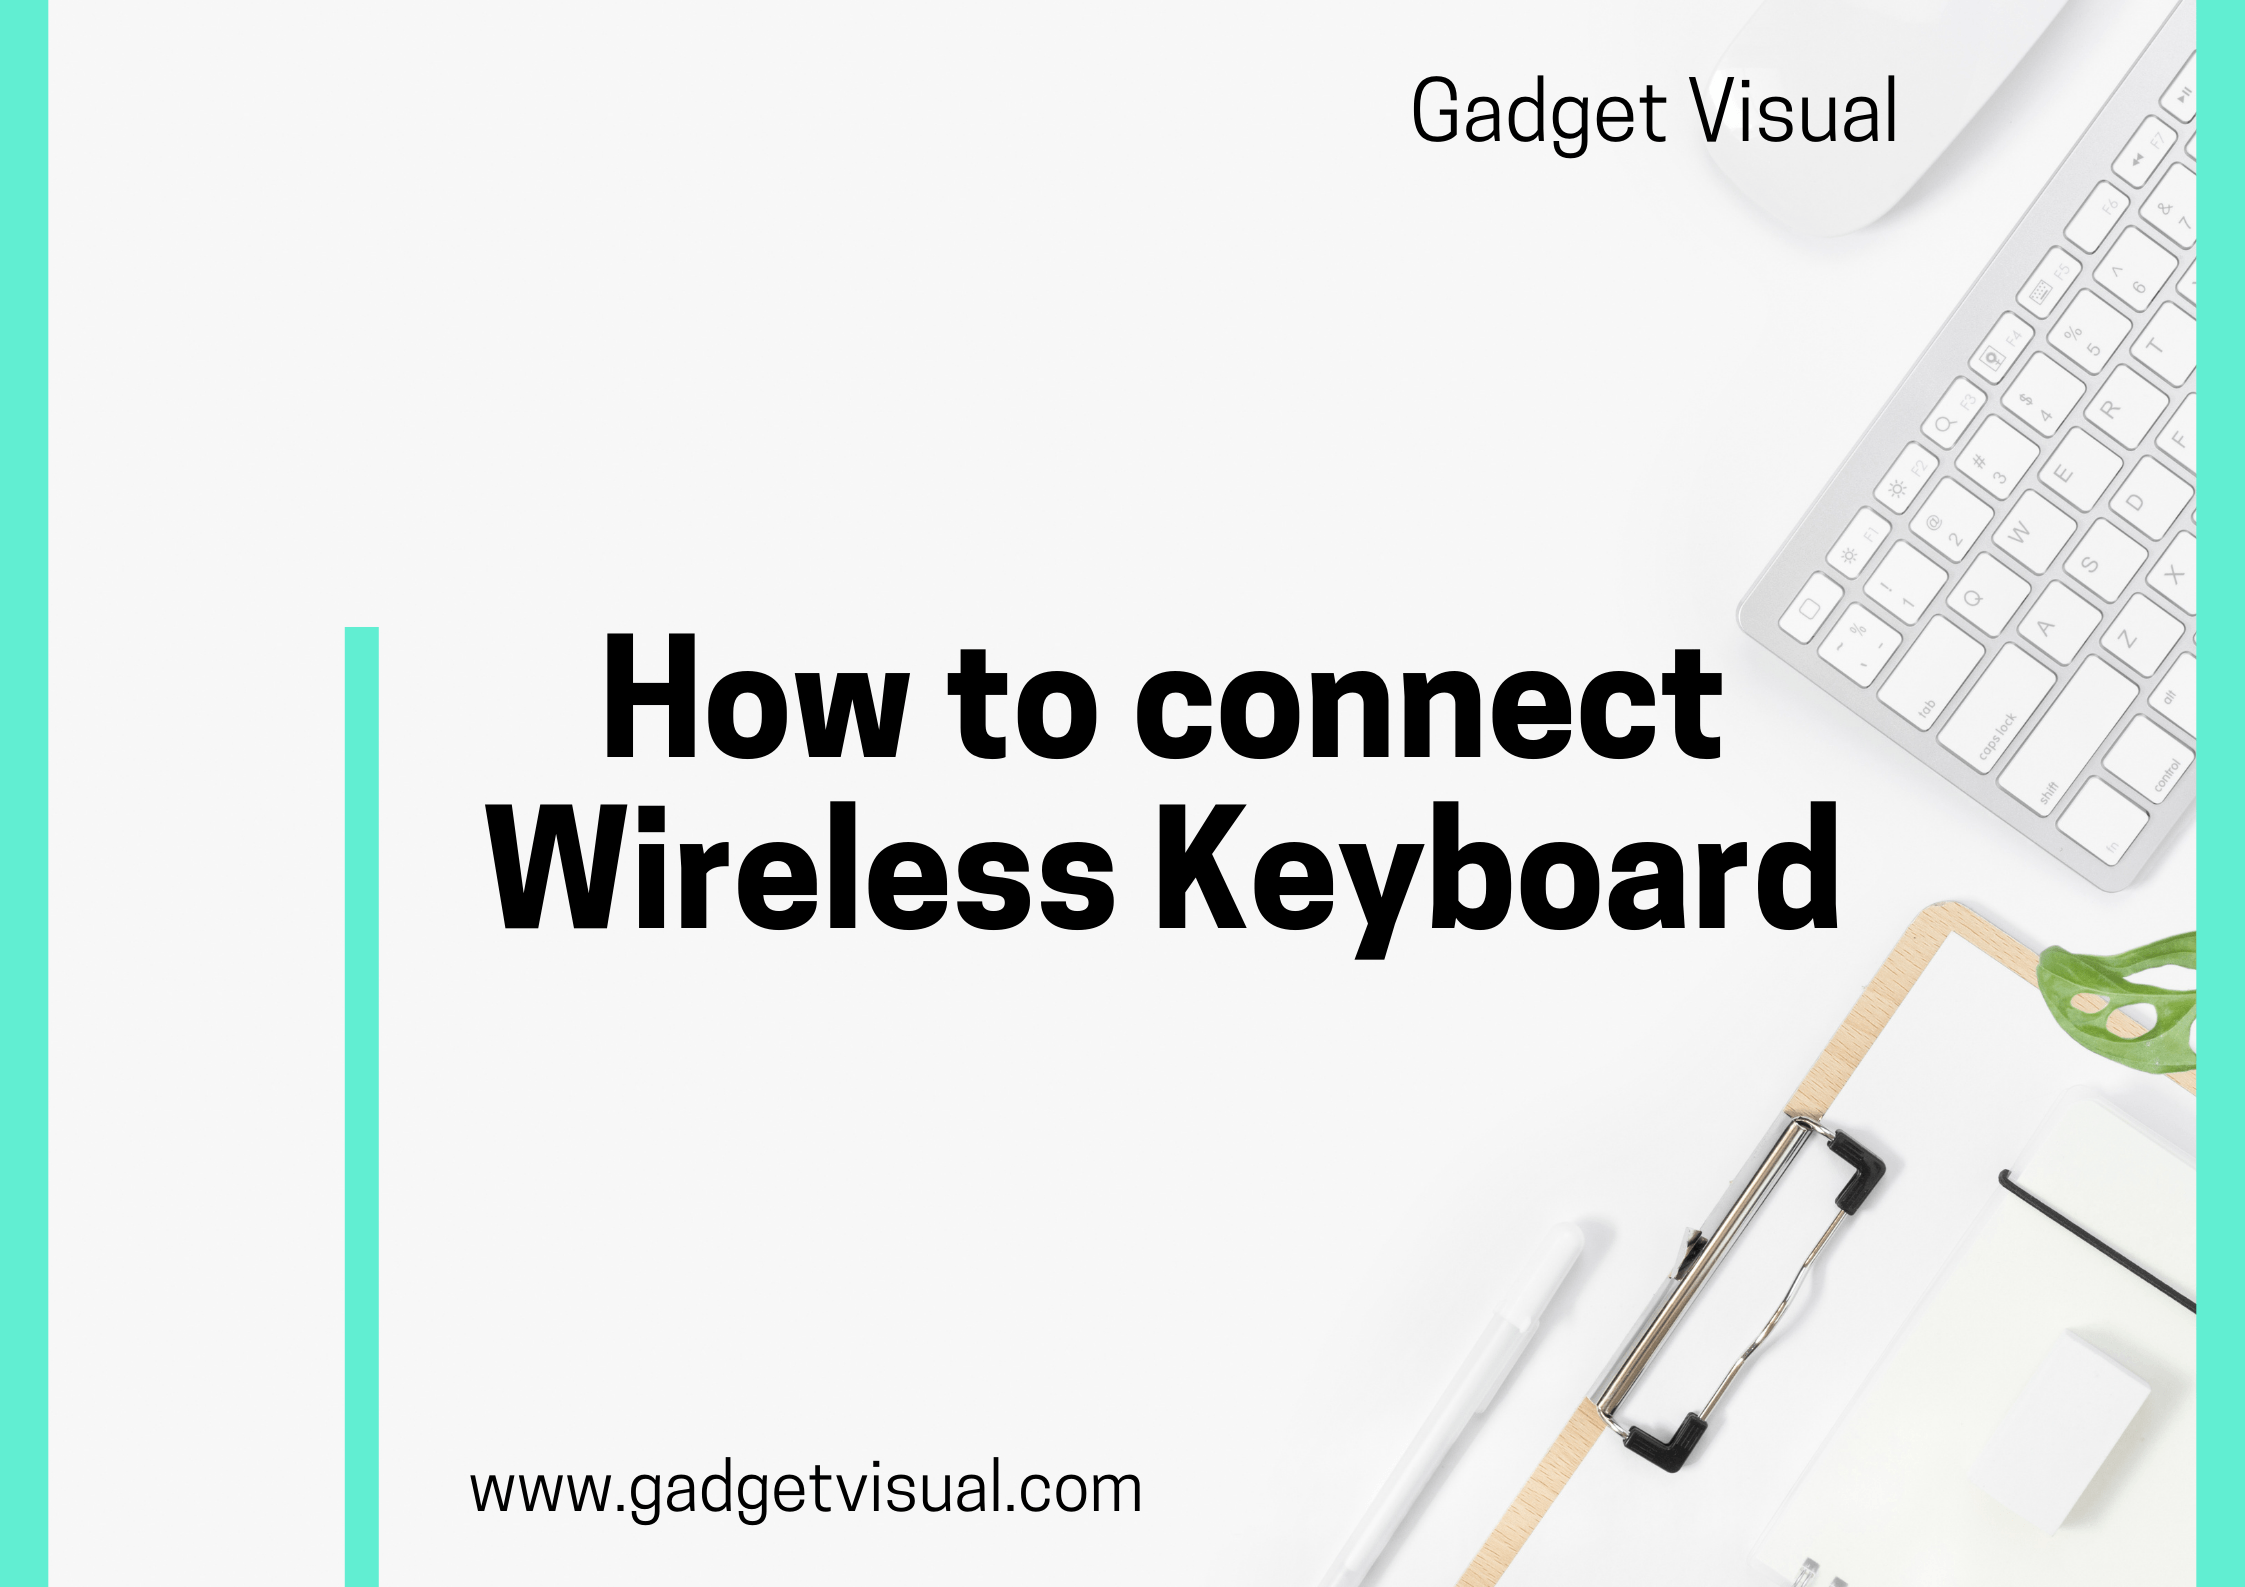 How to connect Wireless Keyboard